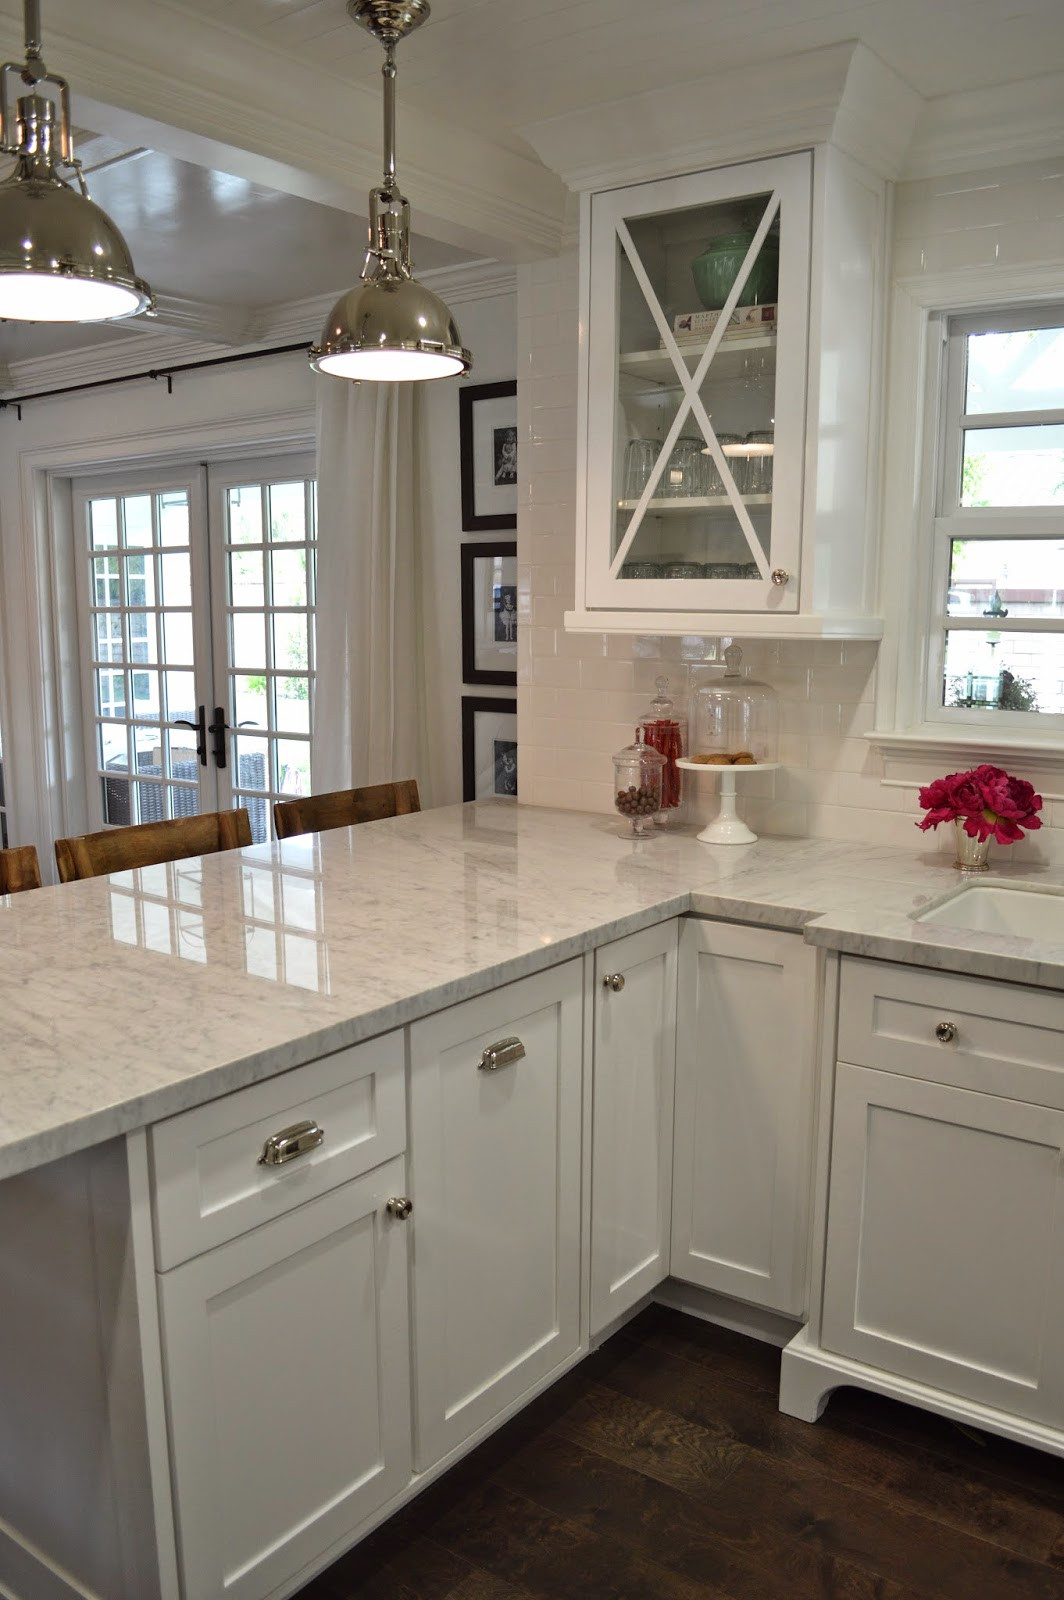 Pinterest Small Kitchen
 The Cape Cod Ranch Renovation Great Room Continued Kitchen